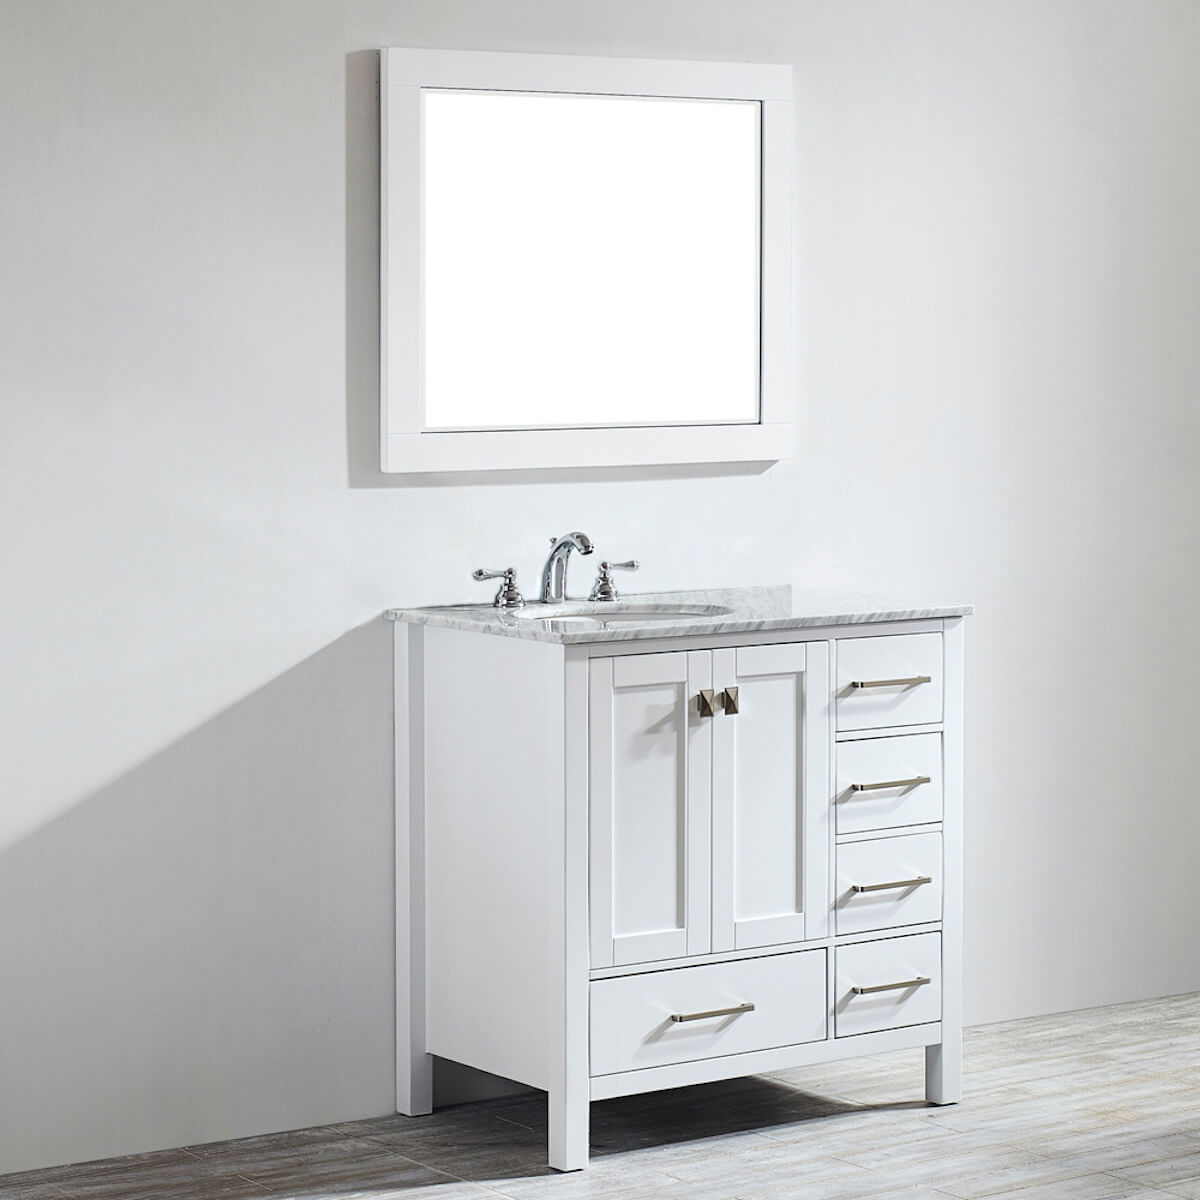 Vinnova Gela 36" White Freestanding Single Vanity with Carrara White Marble Countertop With Mirror Side 723036-WH-CA